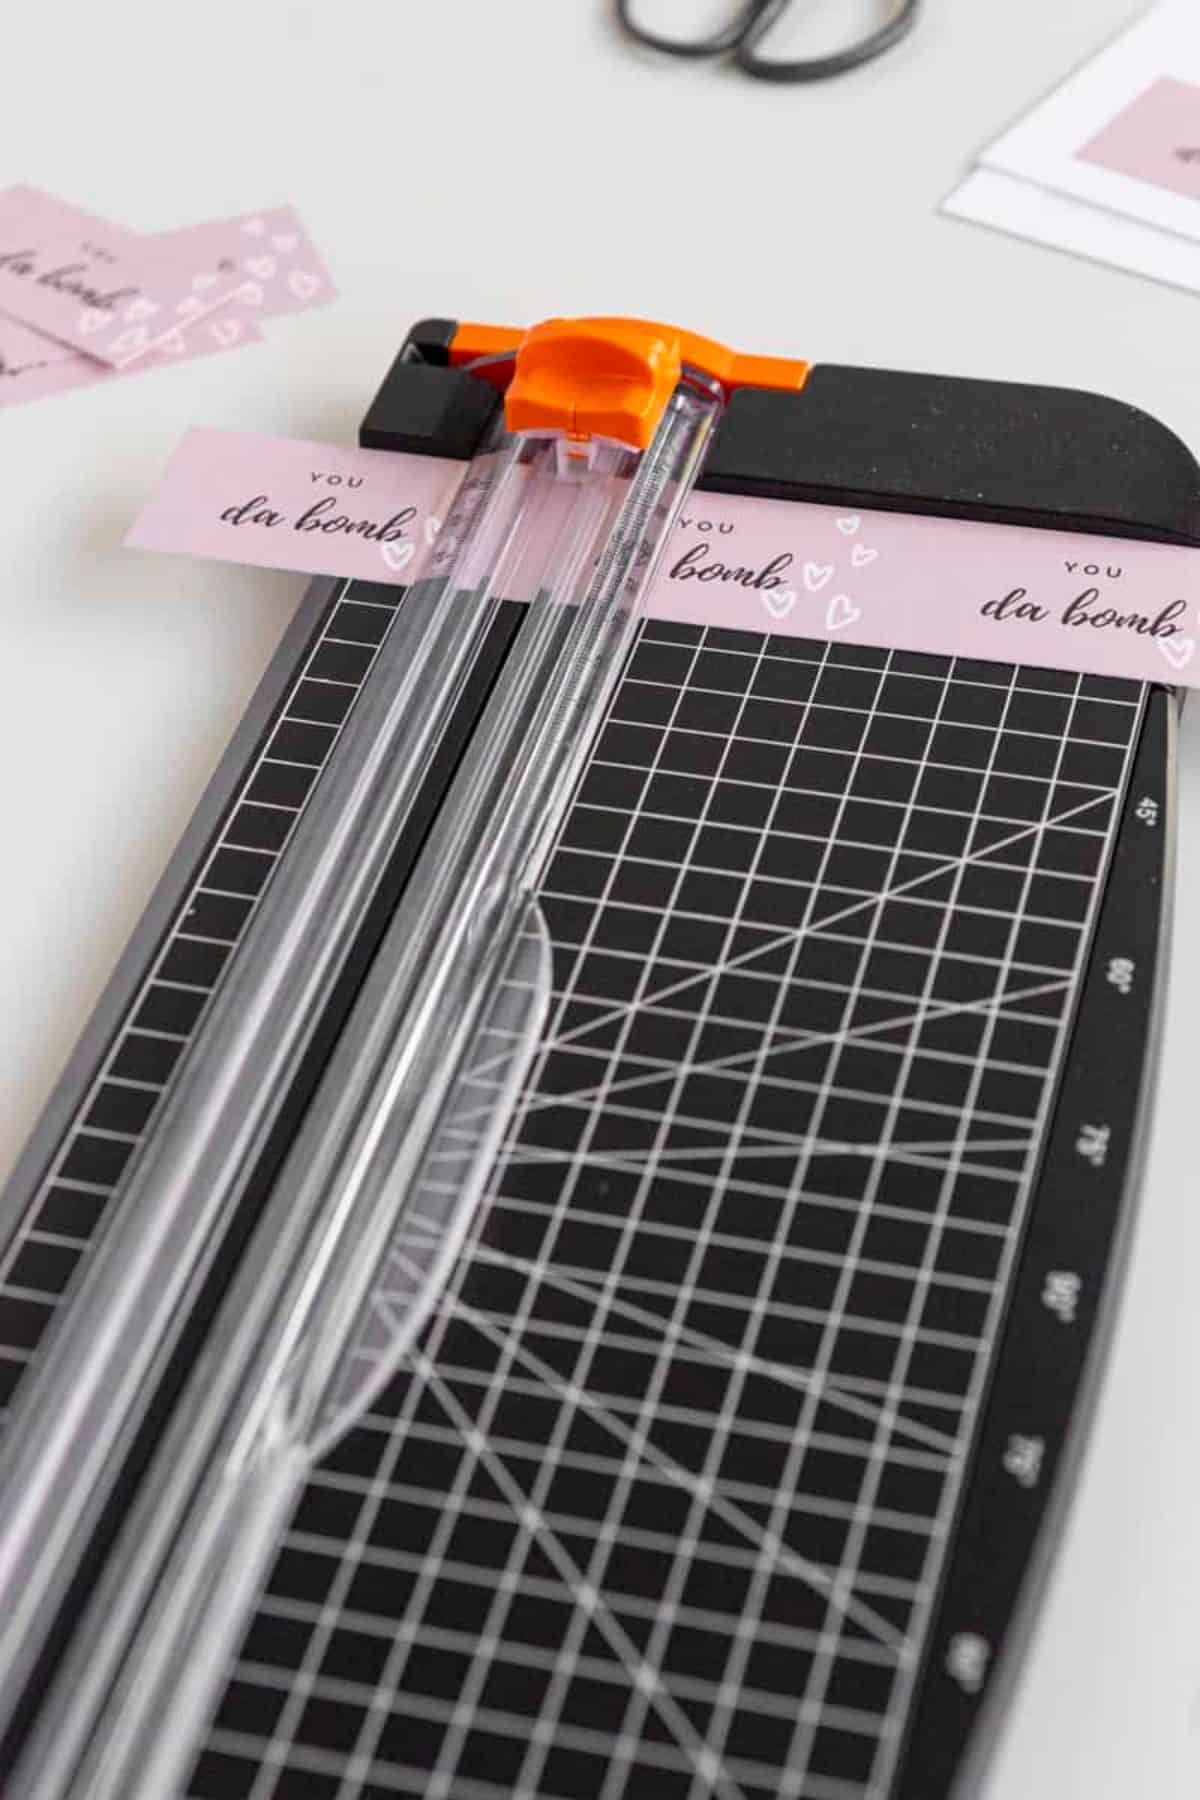 tags being cut in paper cutter